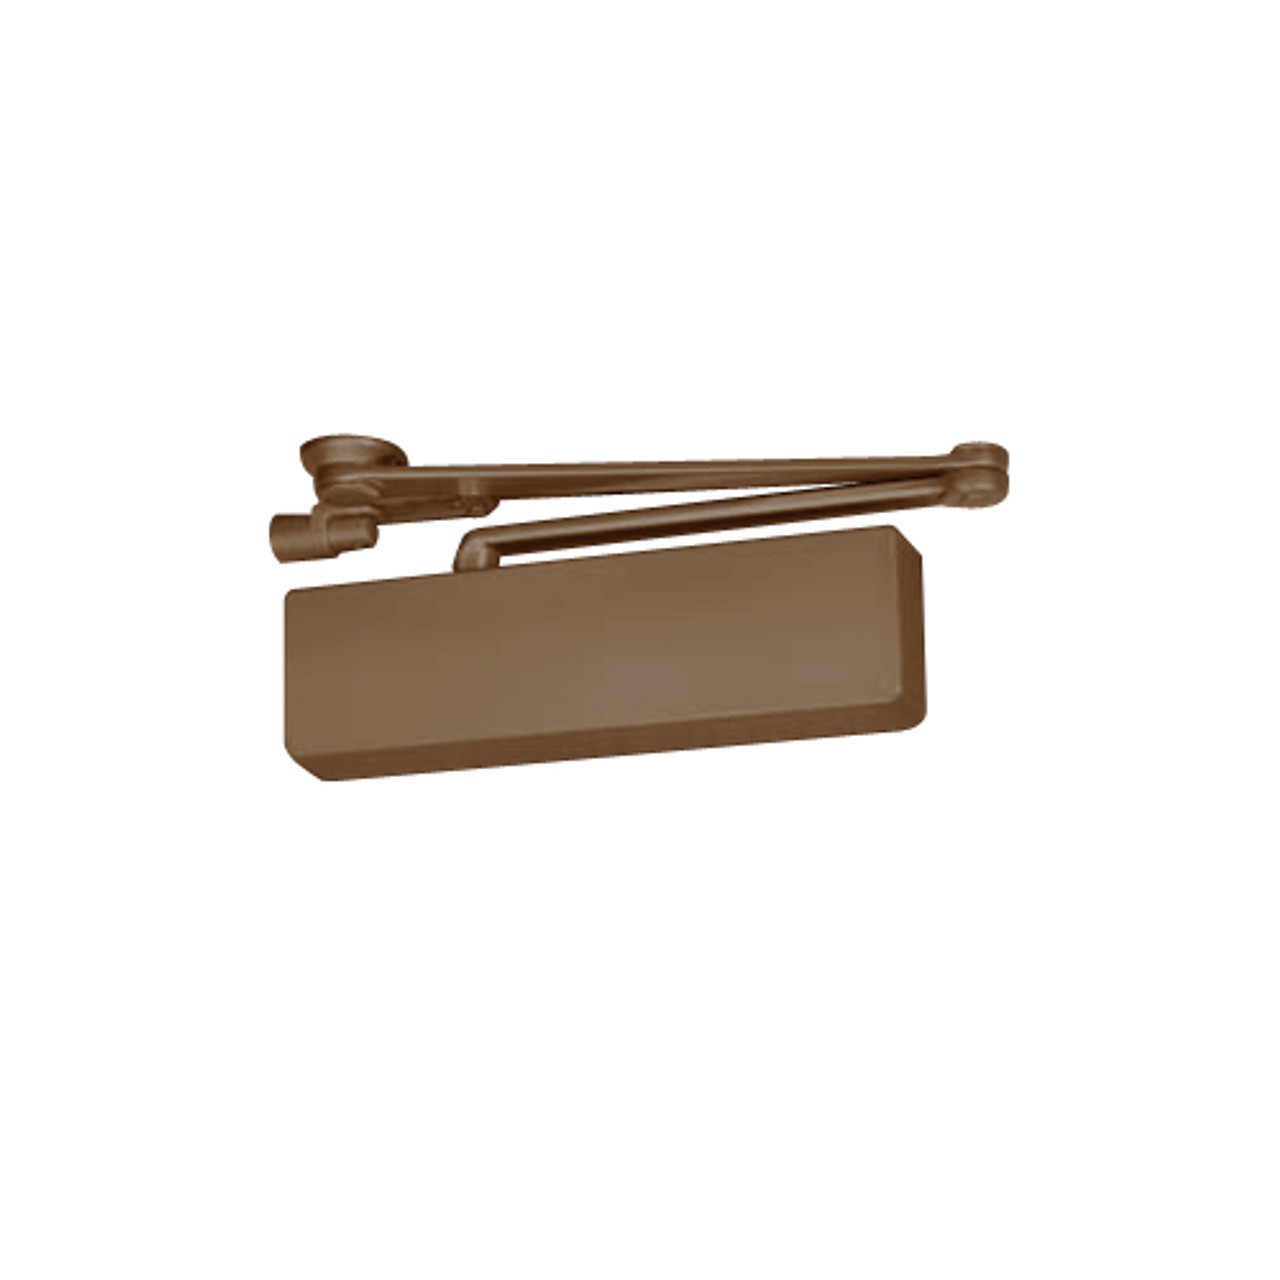 CPS7500-691 Norton 7500 Series Non-Hold Open Institutional Door Closer with CloserPlus Spring Arm in Dull Bronze Finish